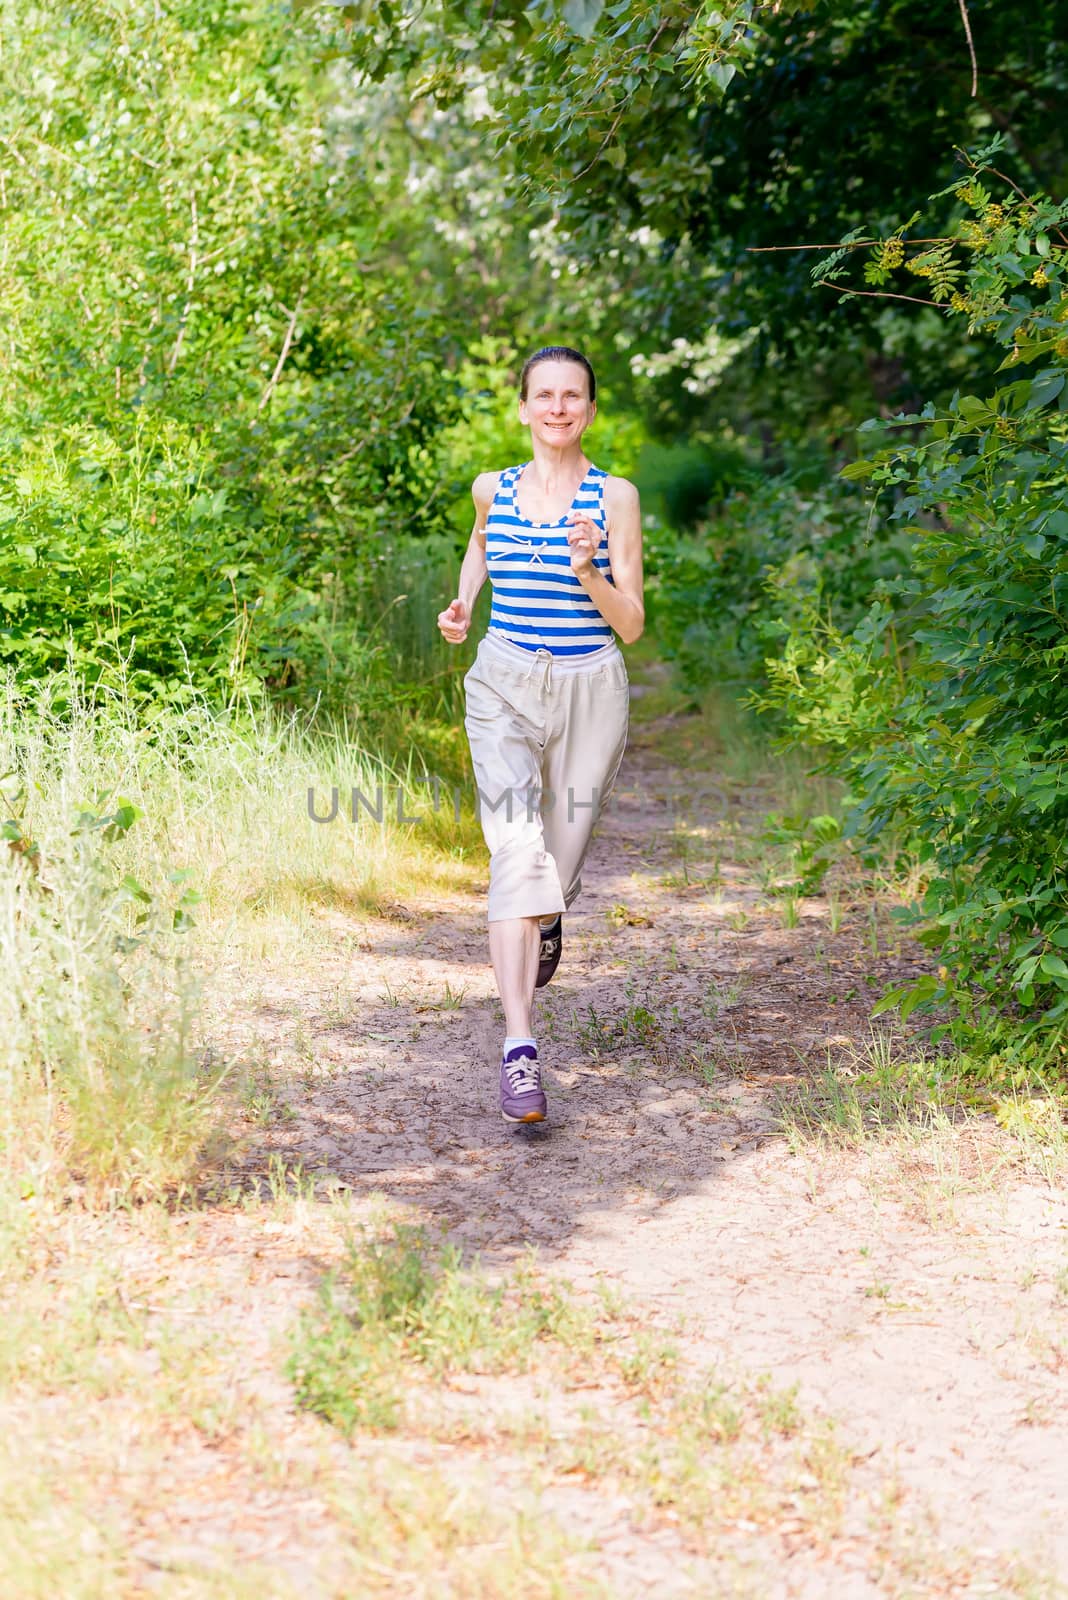 A happy senior woman is running in the forest during a warm summer day